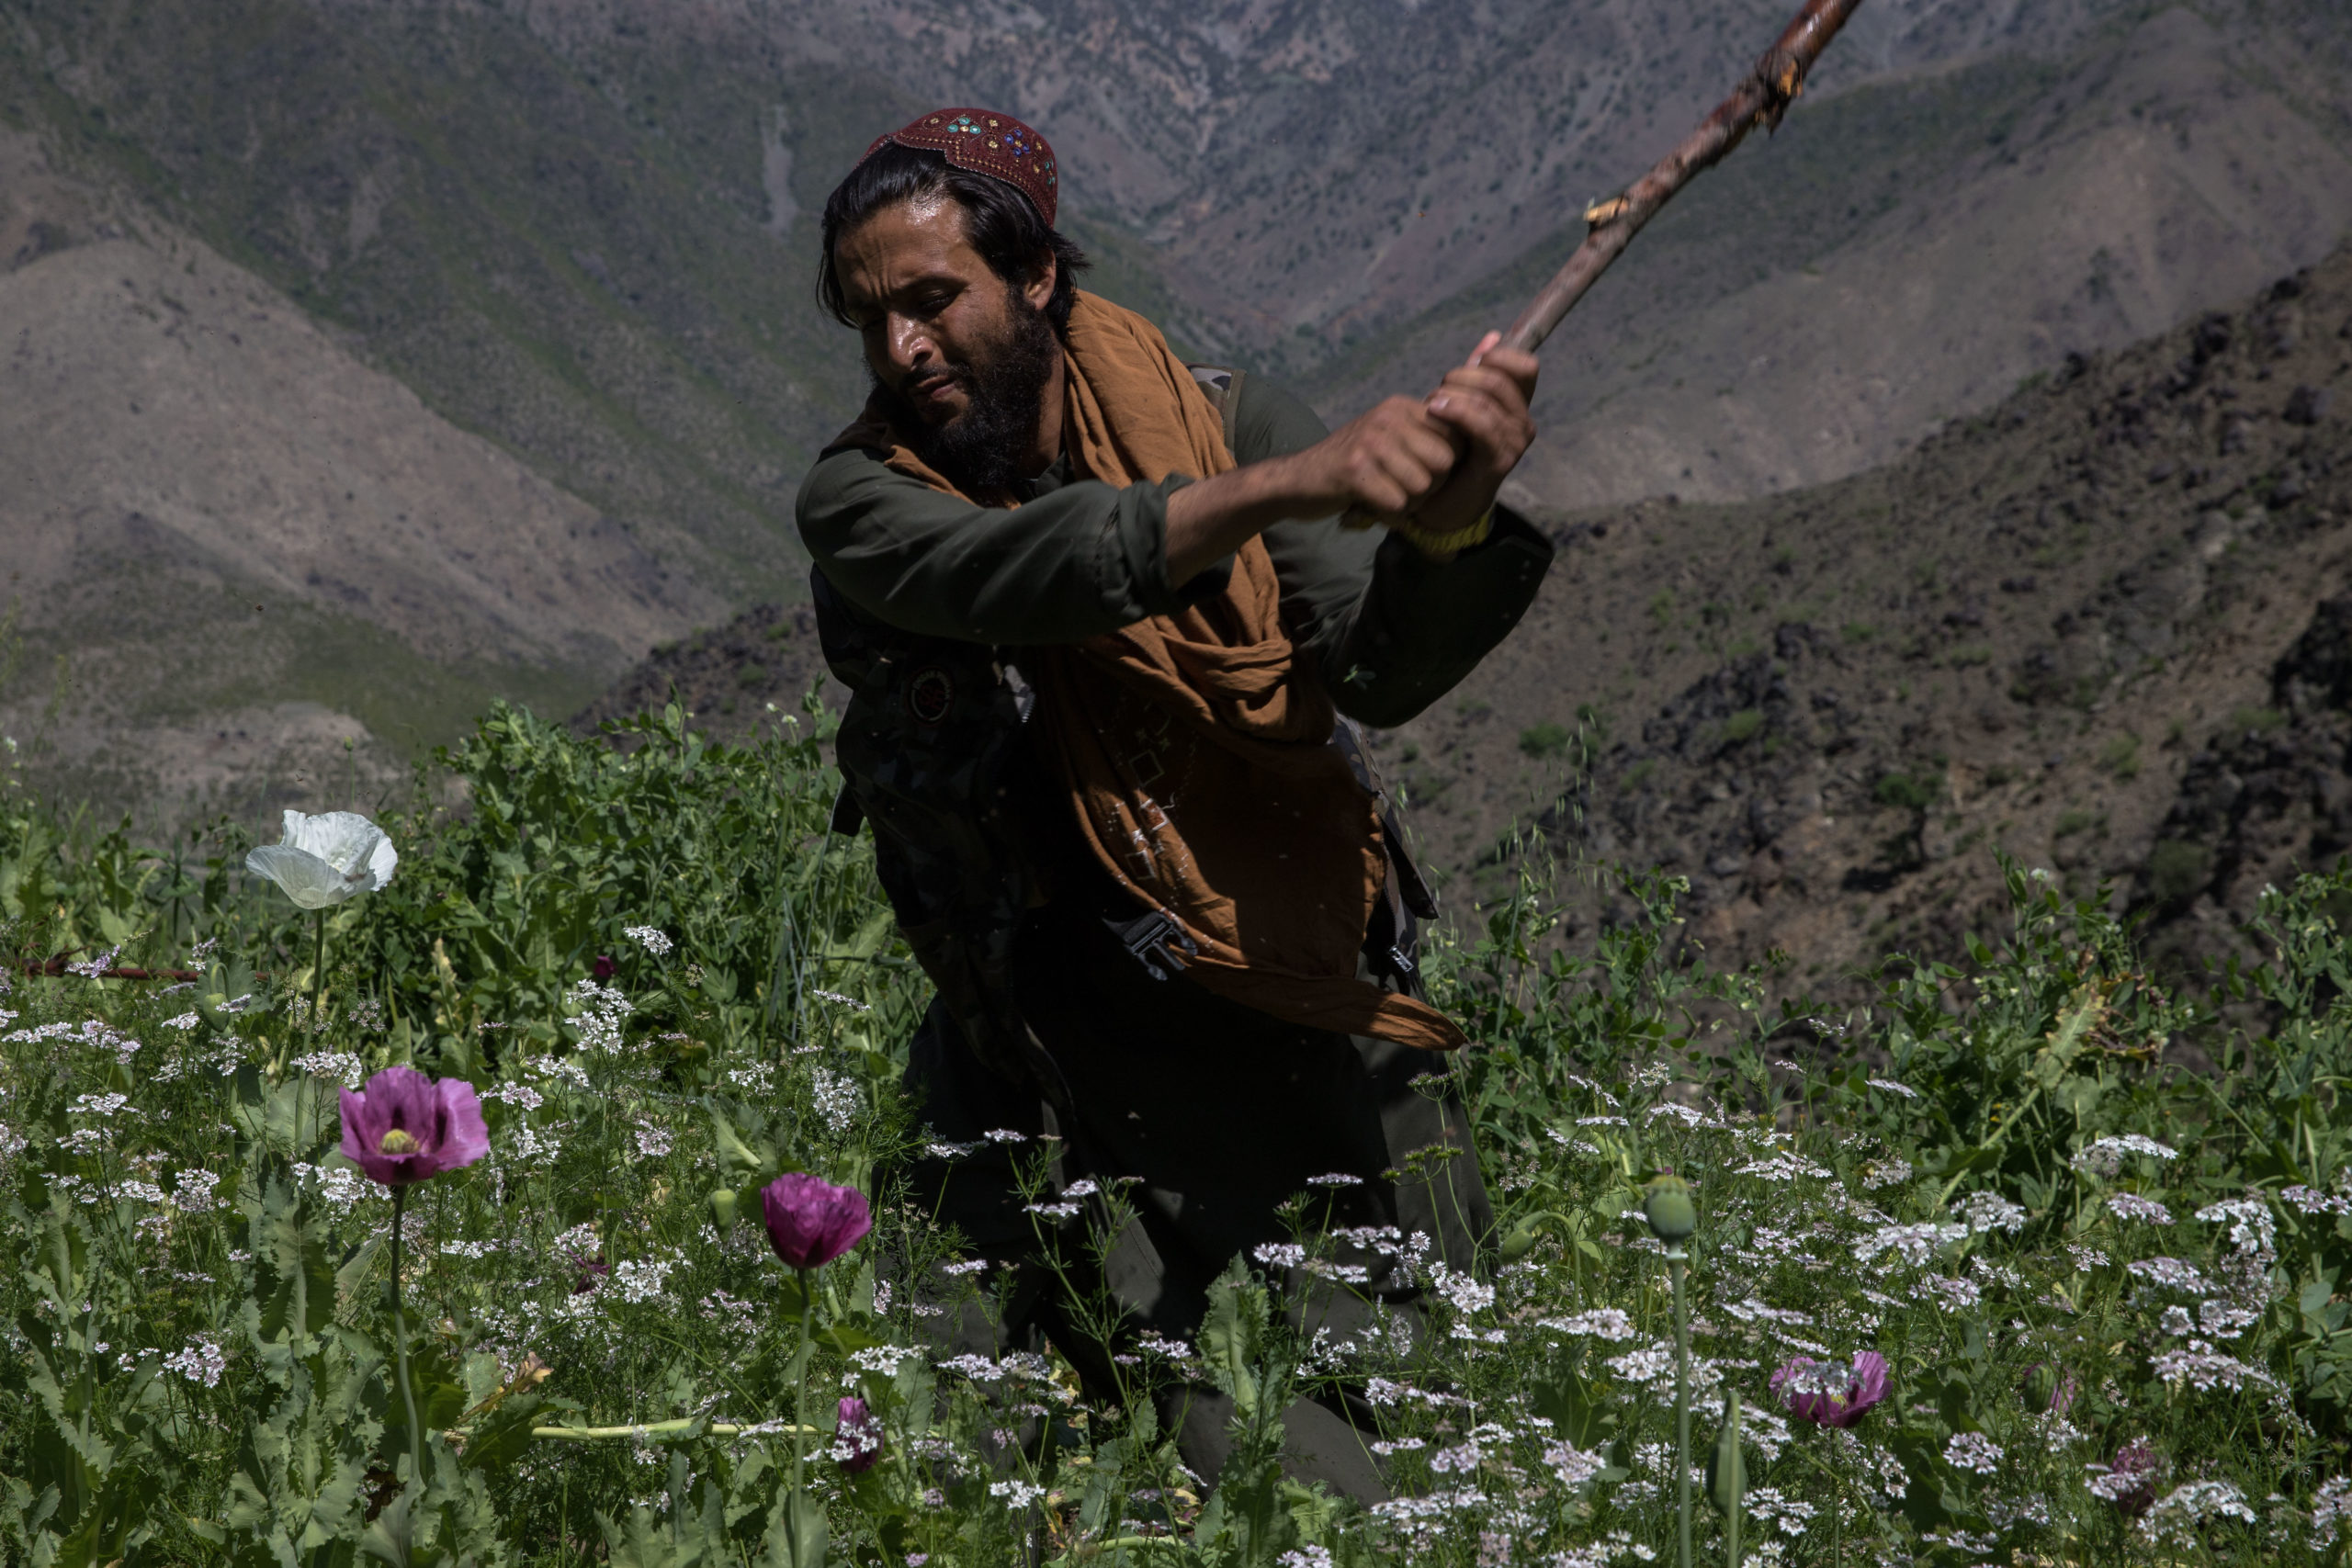 A man swings an agricultural tool in a wide movement aimed at poppy plants that surround him. There are mountains in the background.